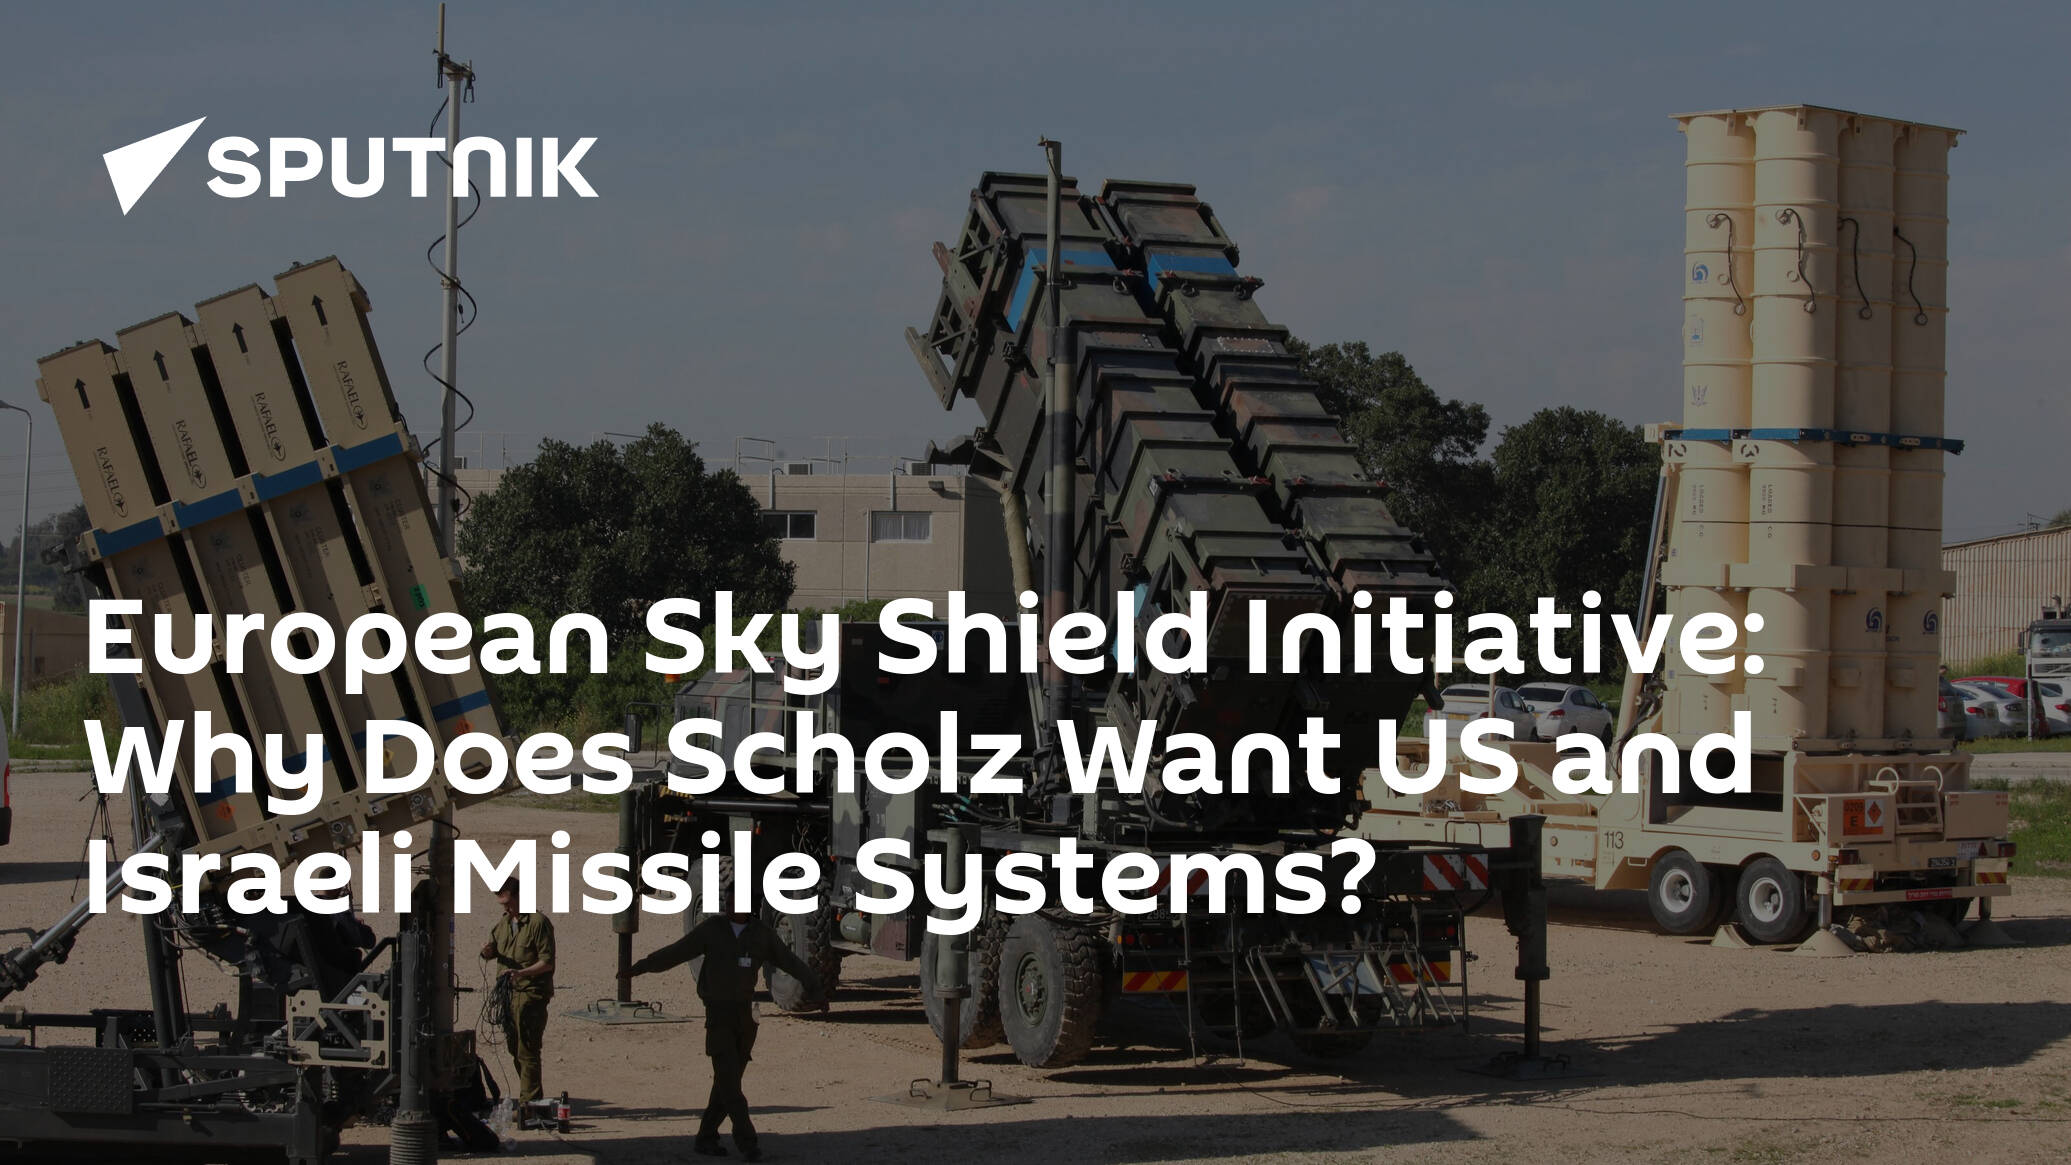 European Sky Shield Initiative: Why Does Scholz Want US and Israeli Missile Systems?